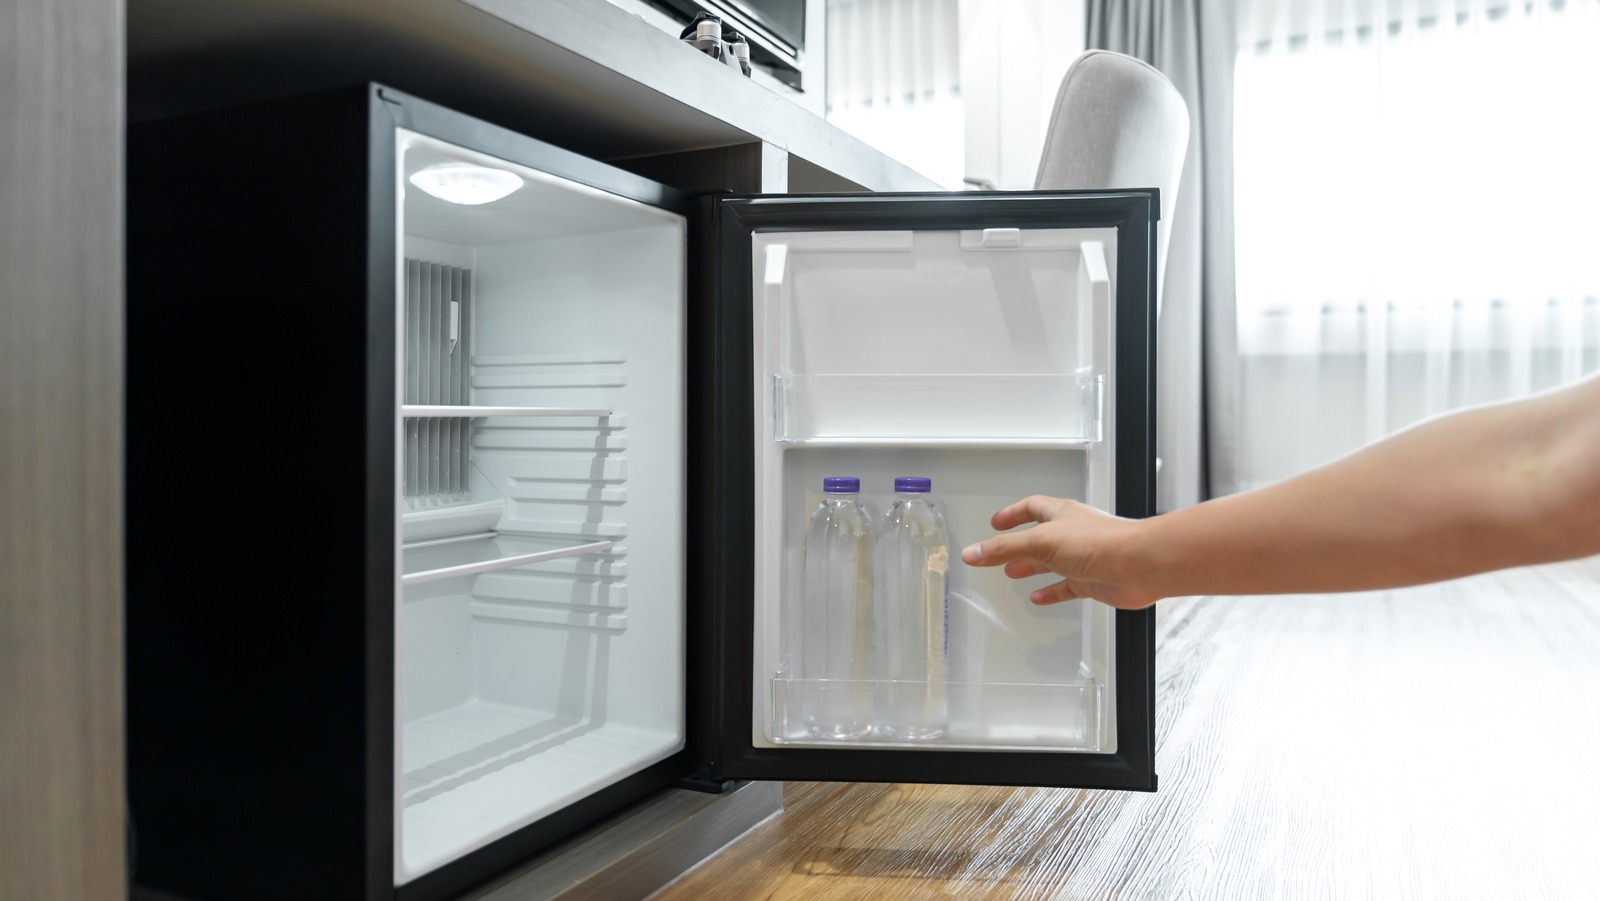 I Tried a Mini-Fridge and I'm Never Storing Beverages with Food Again